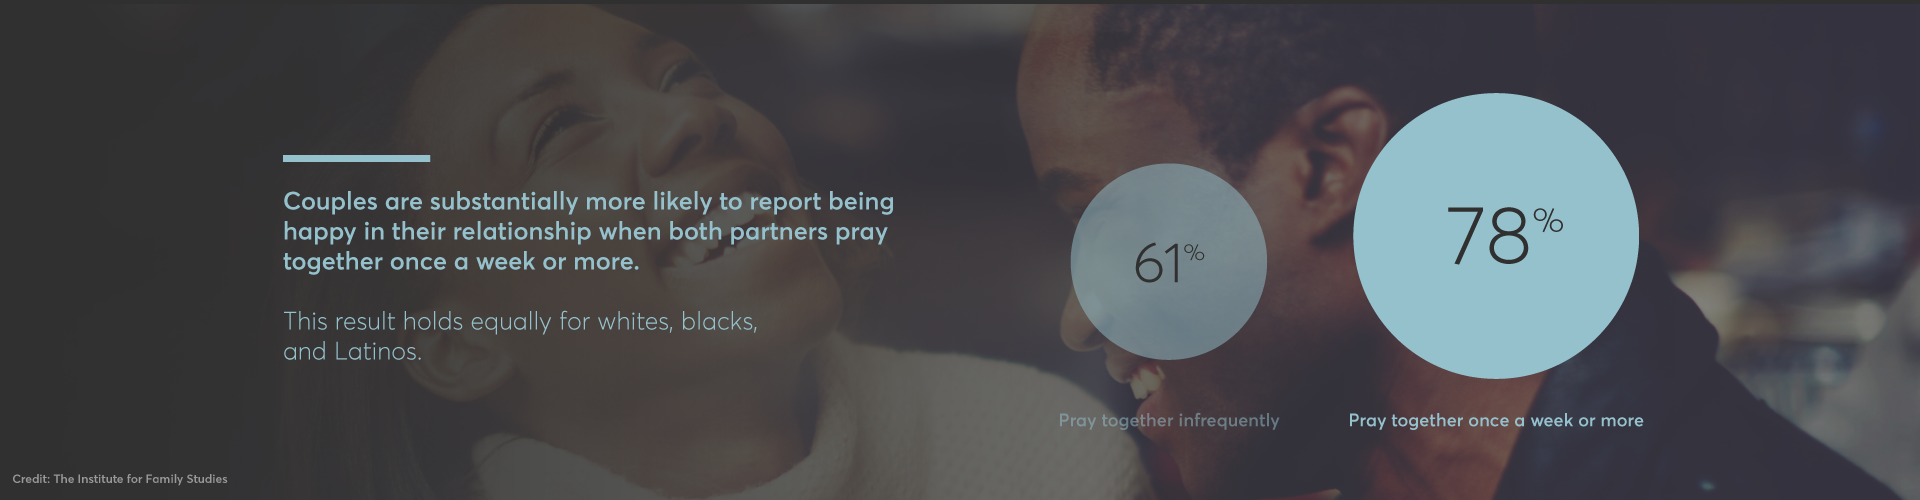 Couples are substantially more likely to report being happy in their relationship when both partners pray together once a week or more. | The Institute for Family Studies, ORBITER magazine